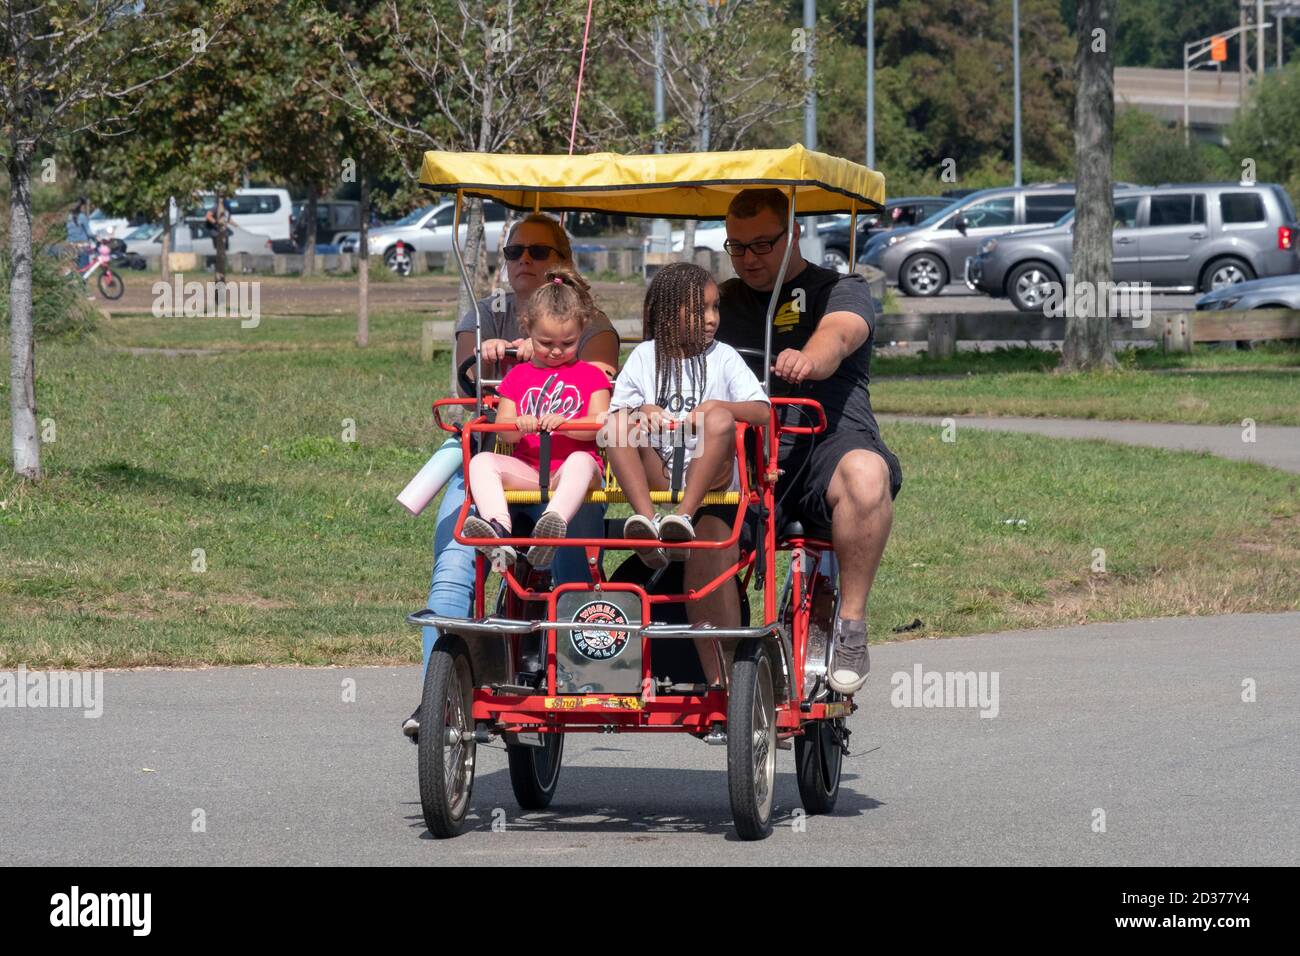 A family of four ride a rented Wheel Fun  4 wheel surrey cycle in Flushing Meadows Corona Park in Queens, New York City. Stock Photo